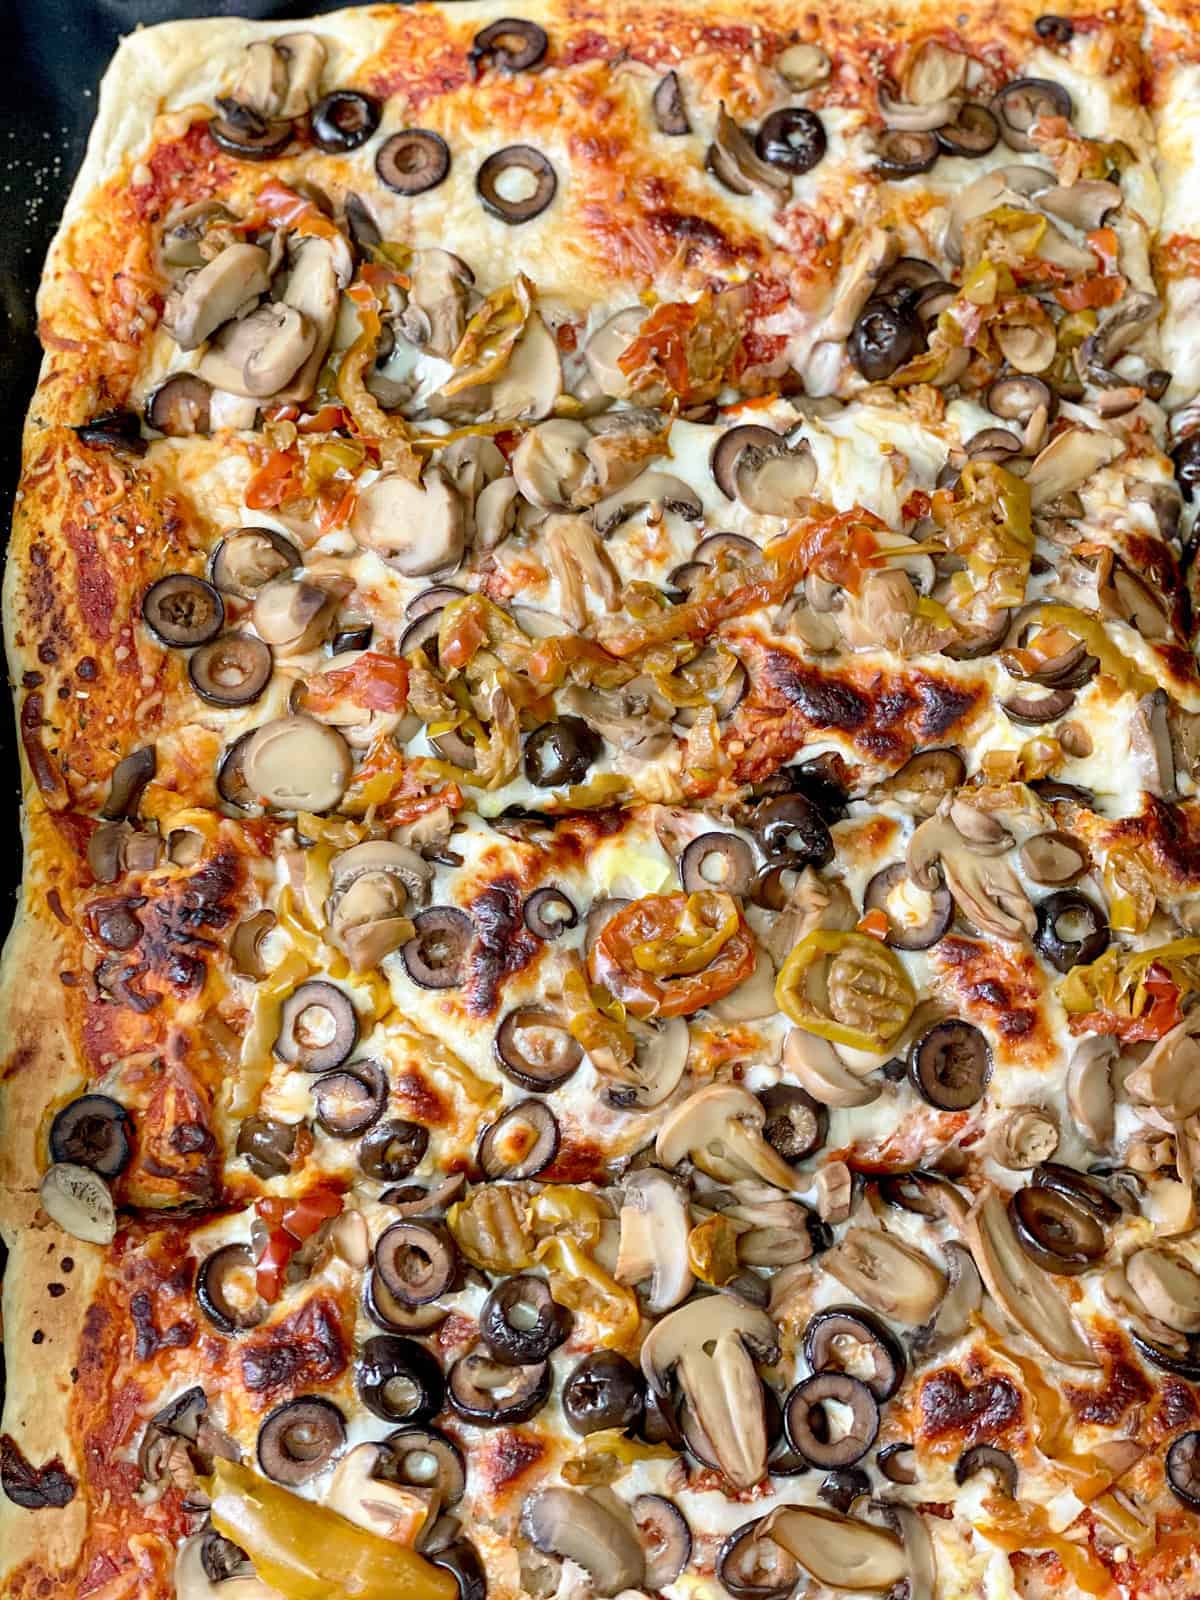 A baked pizza dough topped with melted mozzarella cheese, black olives, mushrooms, pasta sauce and oregano.